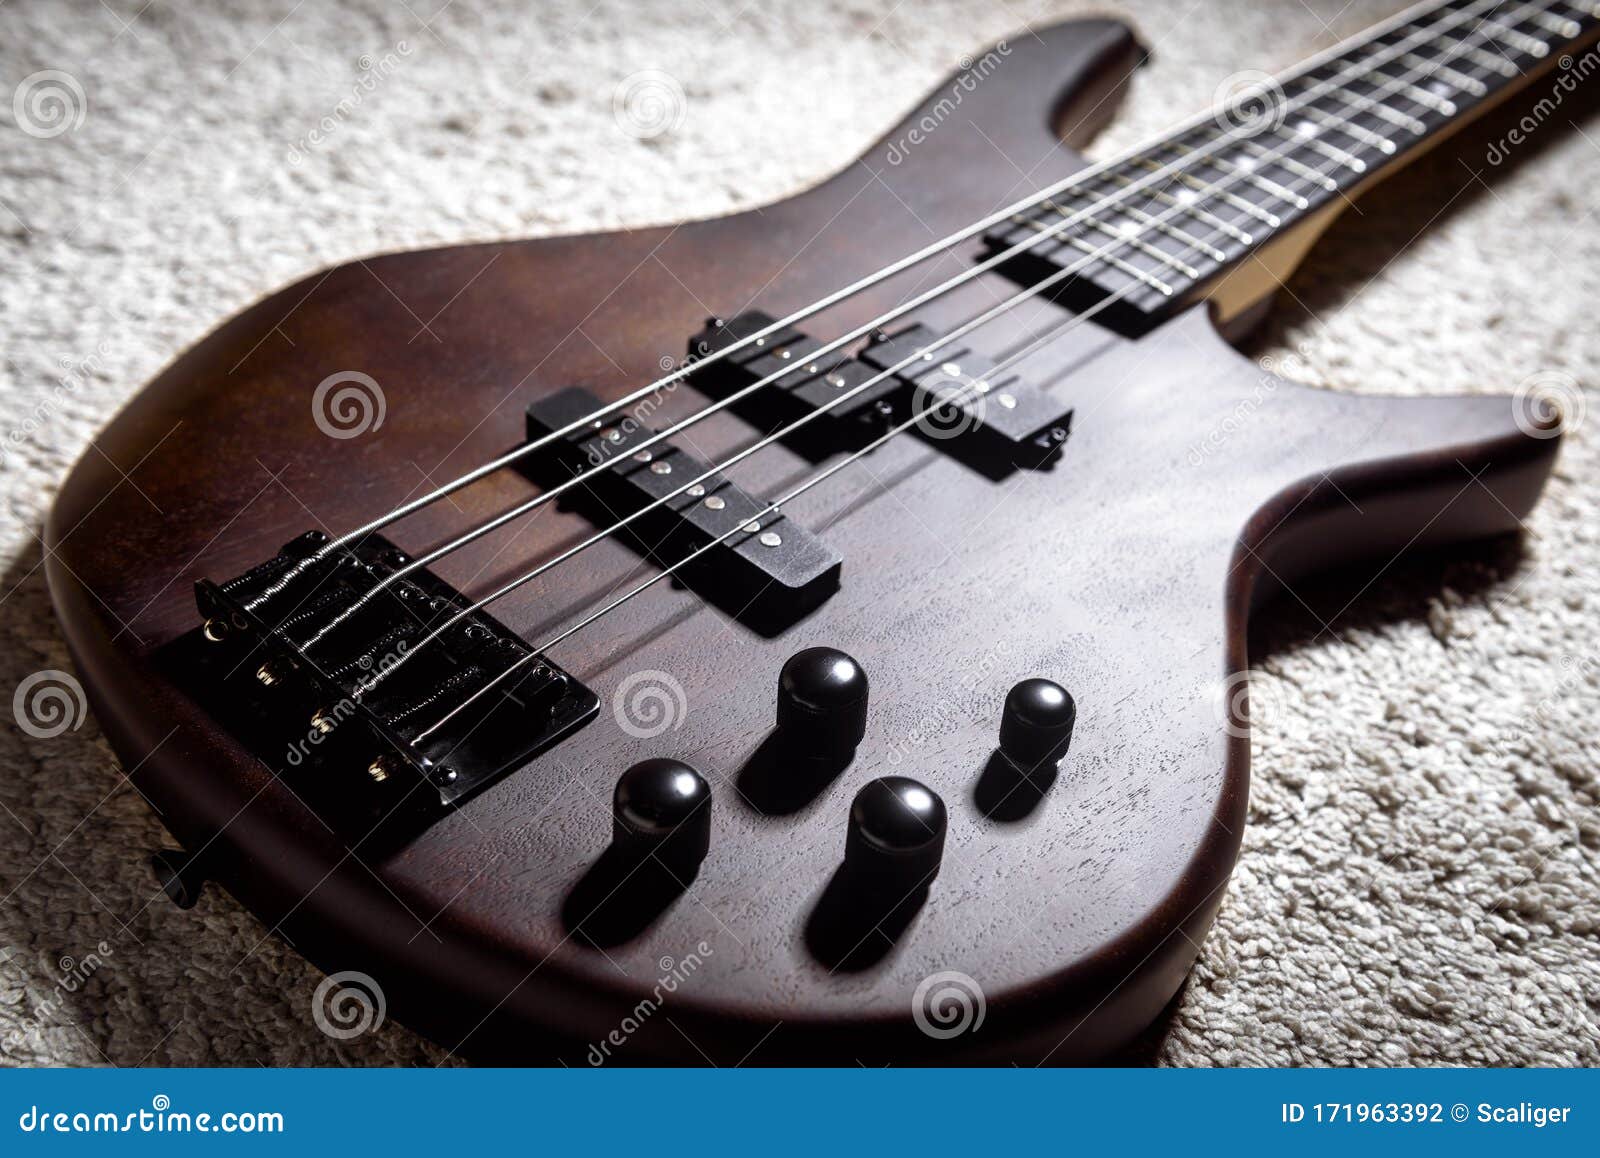 bass guitar with four strings. popular rock musical instrument. close view of brown electric bass on carpet